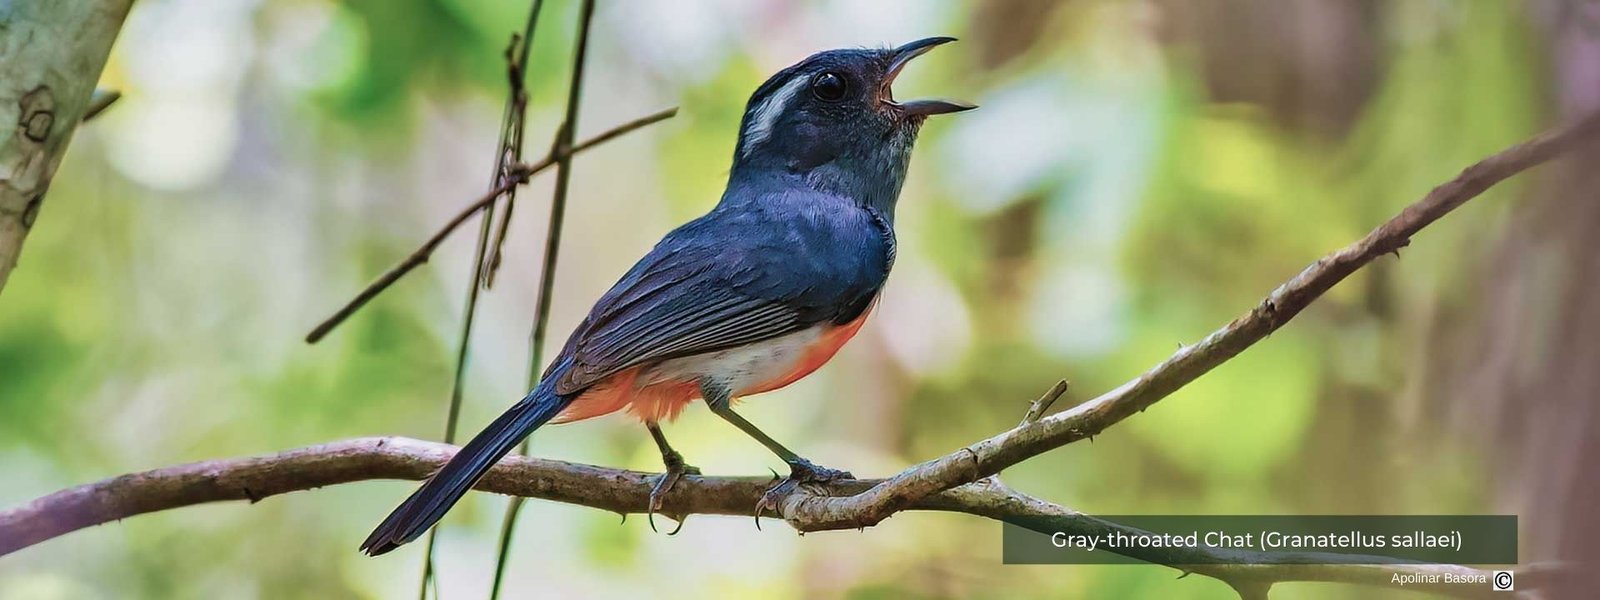 Gray-throated Chat